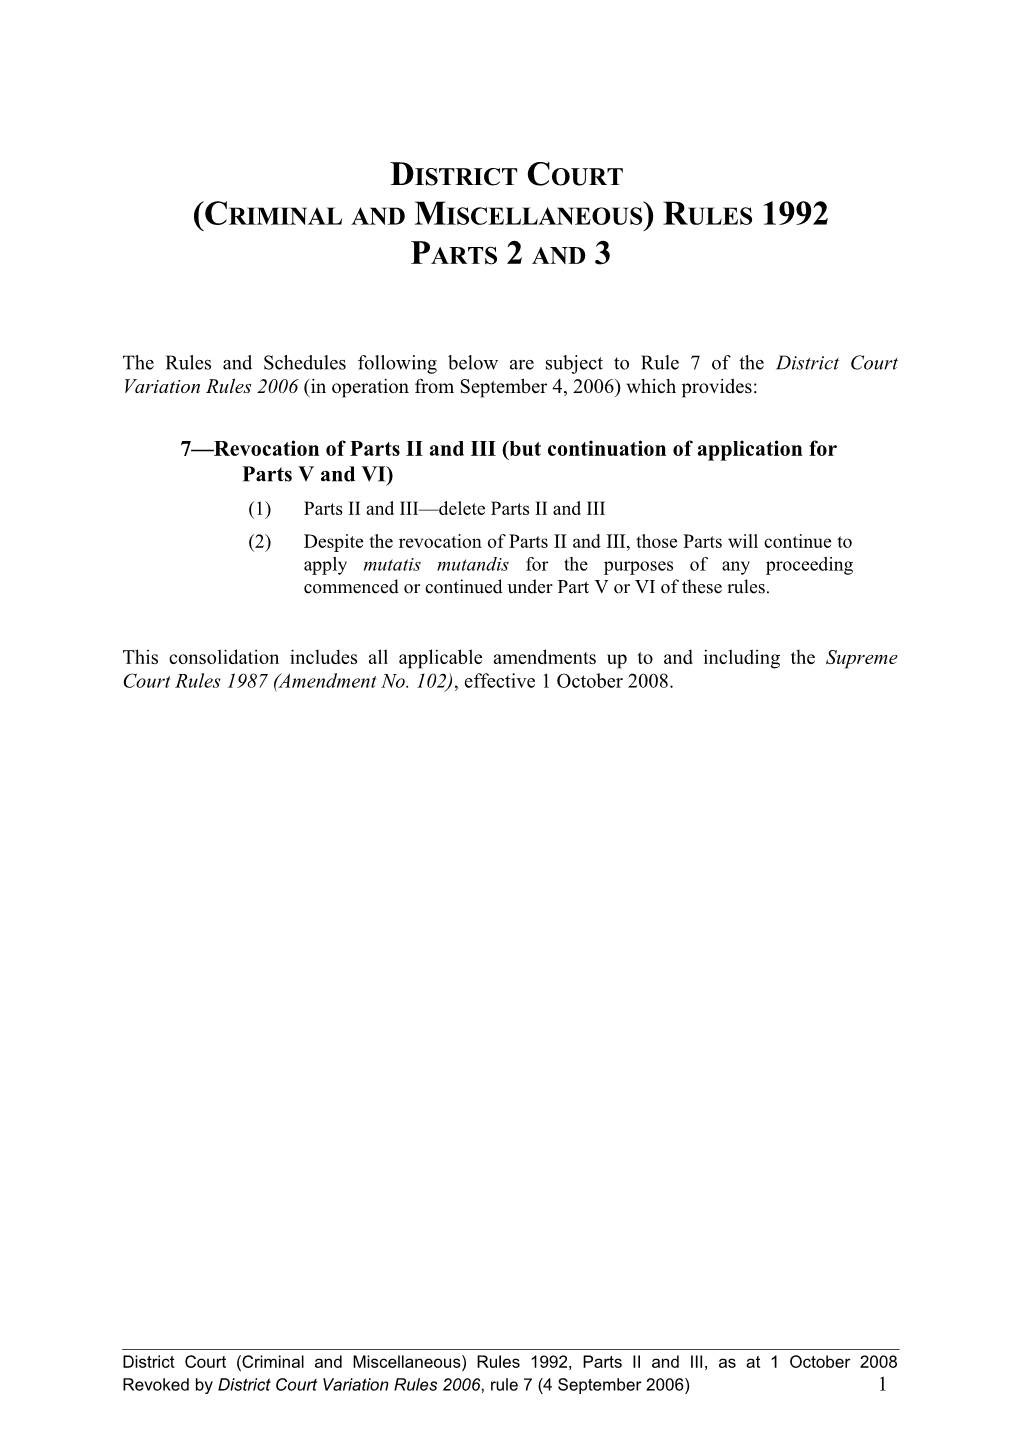 Rules of Court - District Court Rules 1992 - Parts II & III (Civil Division)